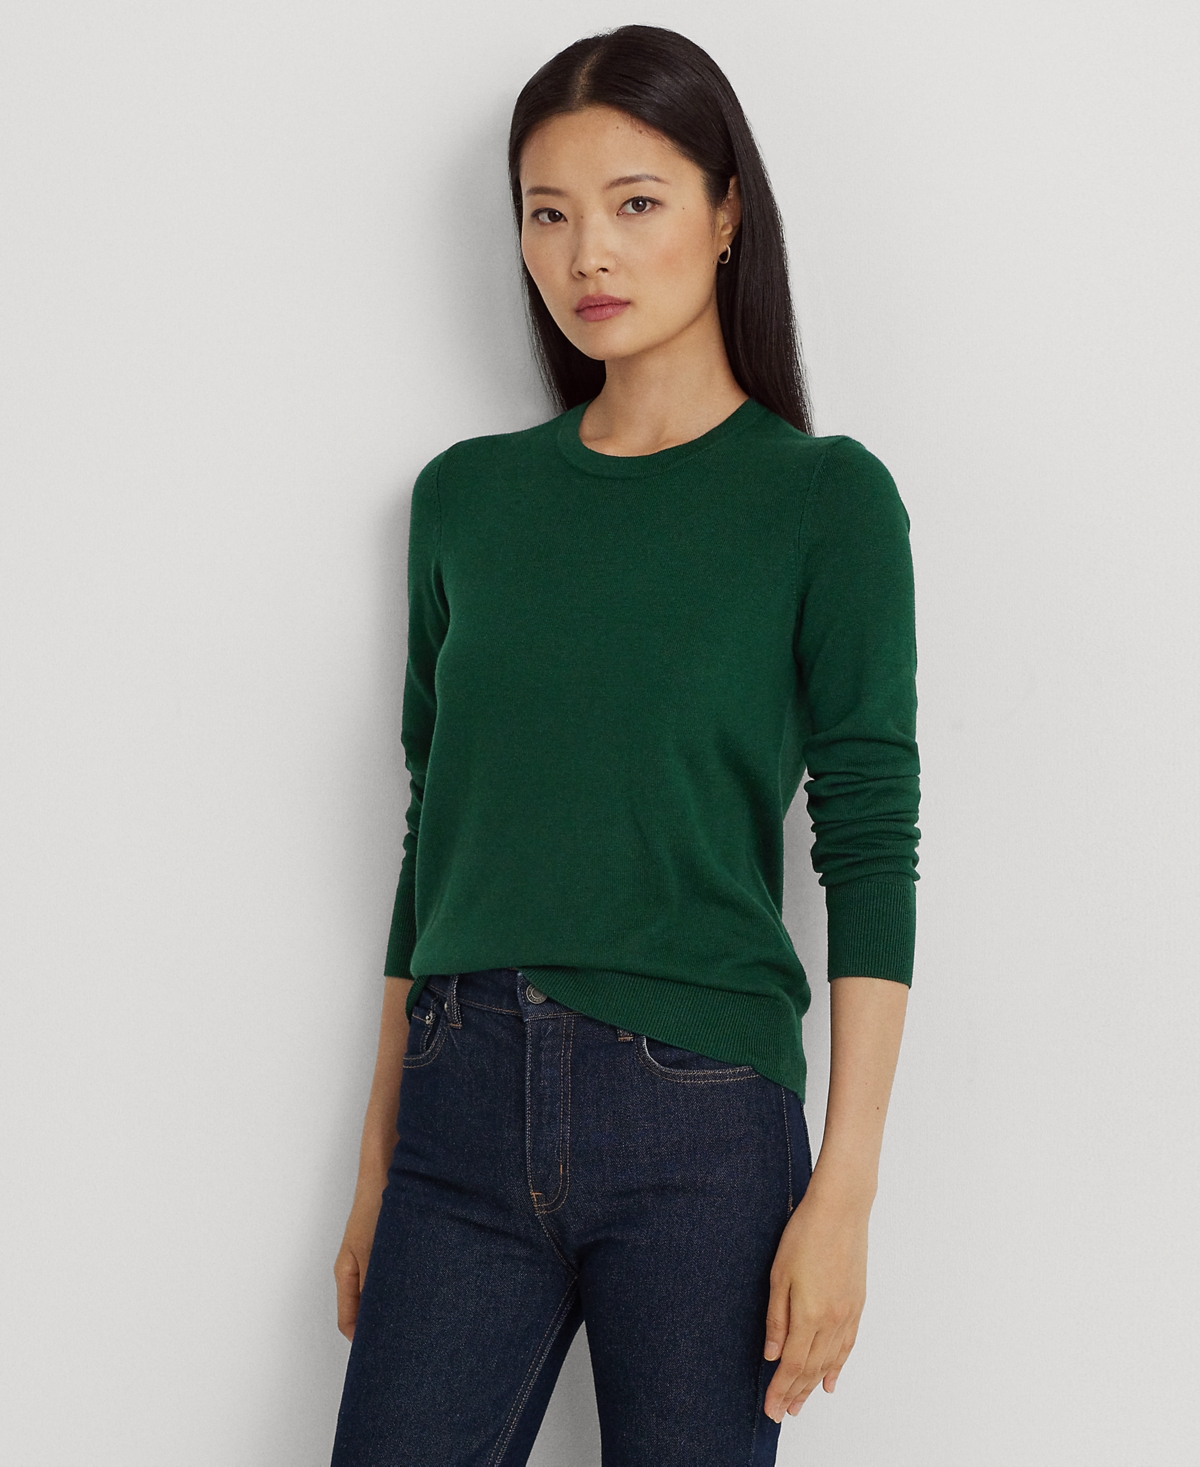 Ralph Lauren Polo Cotton Crewneck Women's Sweater - Green - Size L (other  Sizes Available)